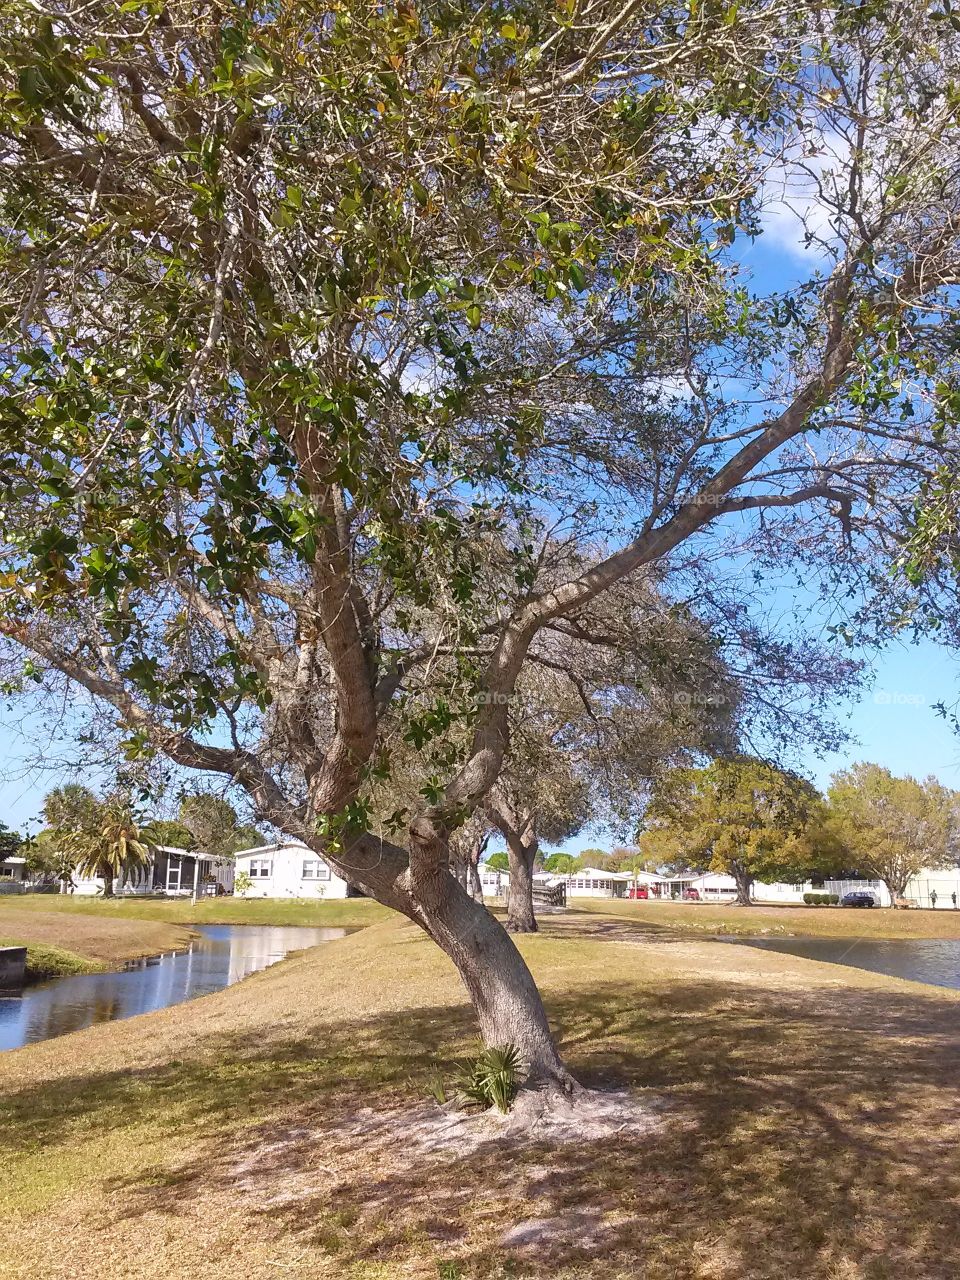 the leaning tree